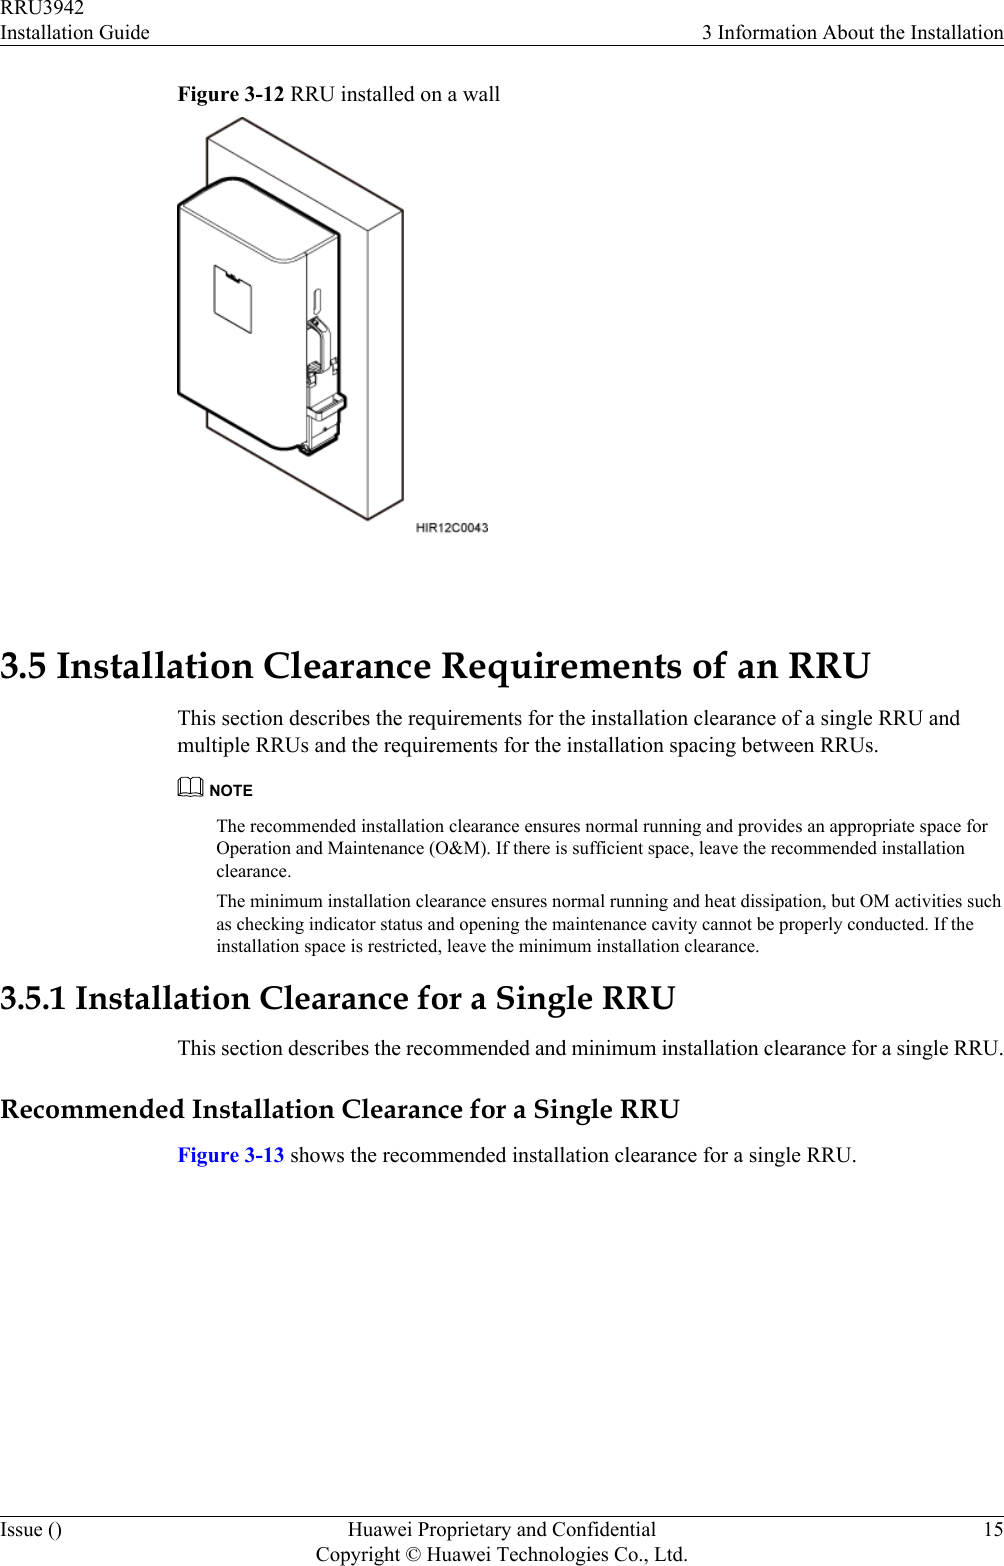 Figure 3-12 RRU installed on a wall 3.5 Installation Clearance Requirements of an RRUThis section describes the requirements for the installation clearance of a single RRU andmultiple RRUs and the requirements for the installation spacing between RRUs.NOTEThe recommended installation clearance ensures normal running and provides an appropriate space forOperation and Maintenance (O&amp;M). If there is sufficient space, leave the recommended installationclearance.The minimum installation clearance ensures normal running and heat dissipation, but OM activities suchas checking indicator status and opening the maintenance cavity cannot be properly conducted. If theinstallation space is restricted, leave the minimum installation clearance.3.5.1 Installation Clearance for a Single RRUThis section describes the recommended and minimum installation clearance for a single RRU.Recommended Installation Clearance for a Single RRUFigure 3-13 shows the recommended installation clearance for a single RRU.RRU3942Installation Guide 3 Information About the InstallationIssue () Huawei Proprietary and ConfidentialCopyright © Huawei Technologies Co., Ltd.15